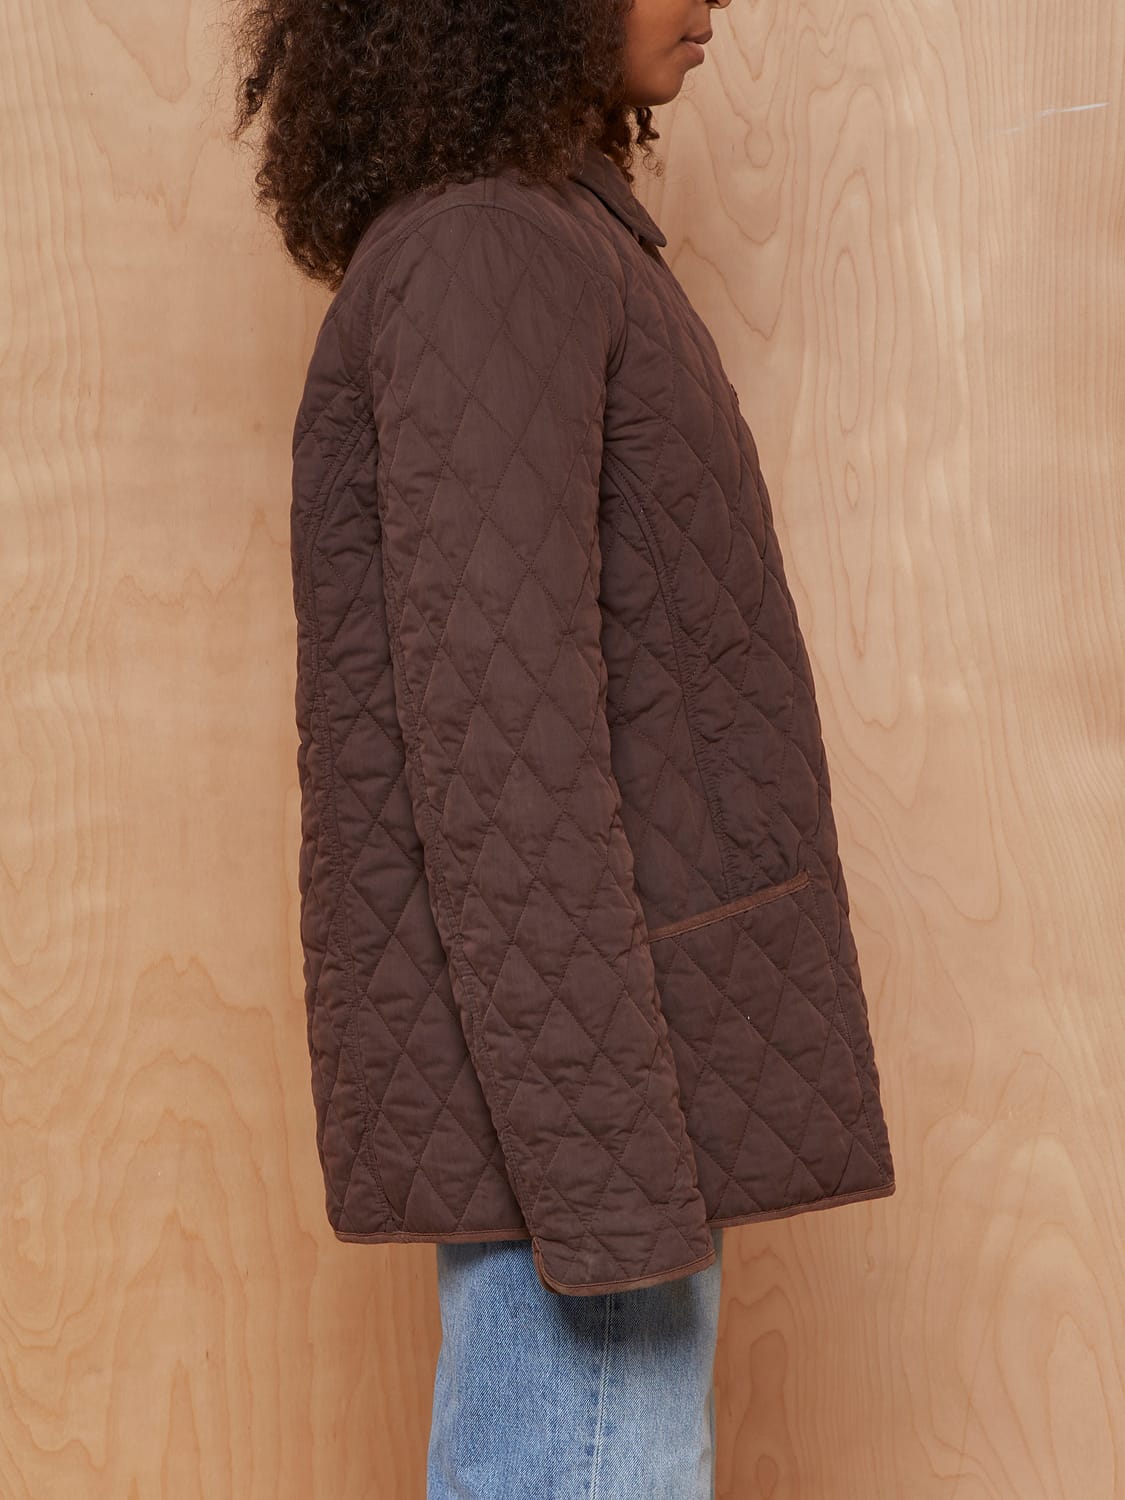 L.L. Bean Quilted Jacket